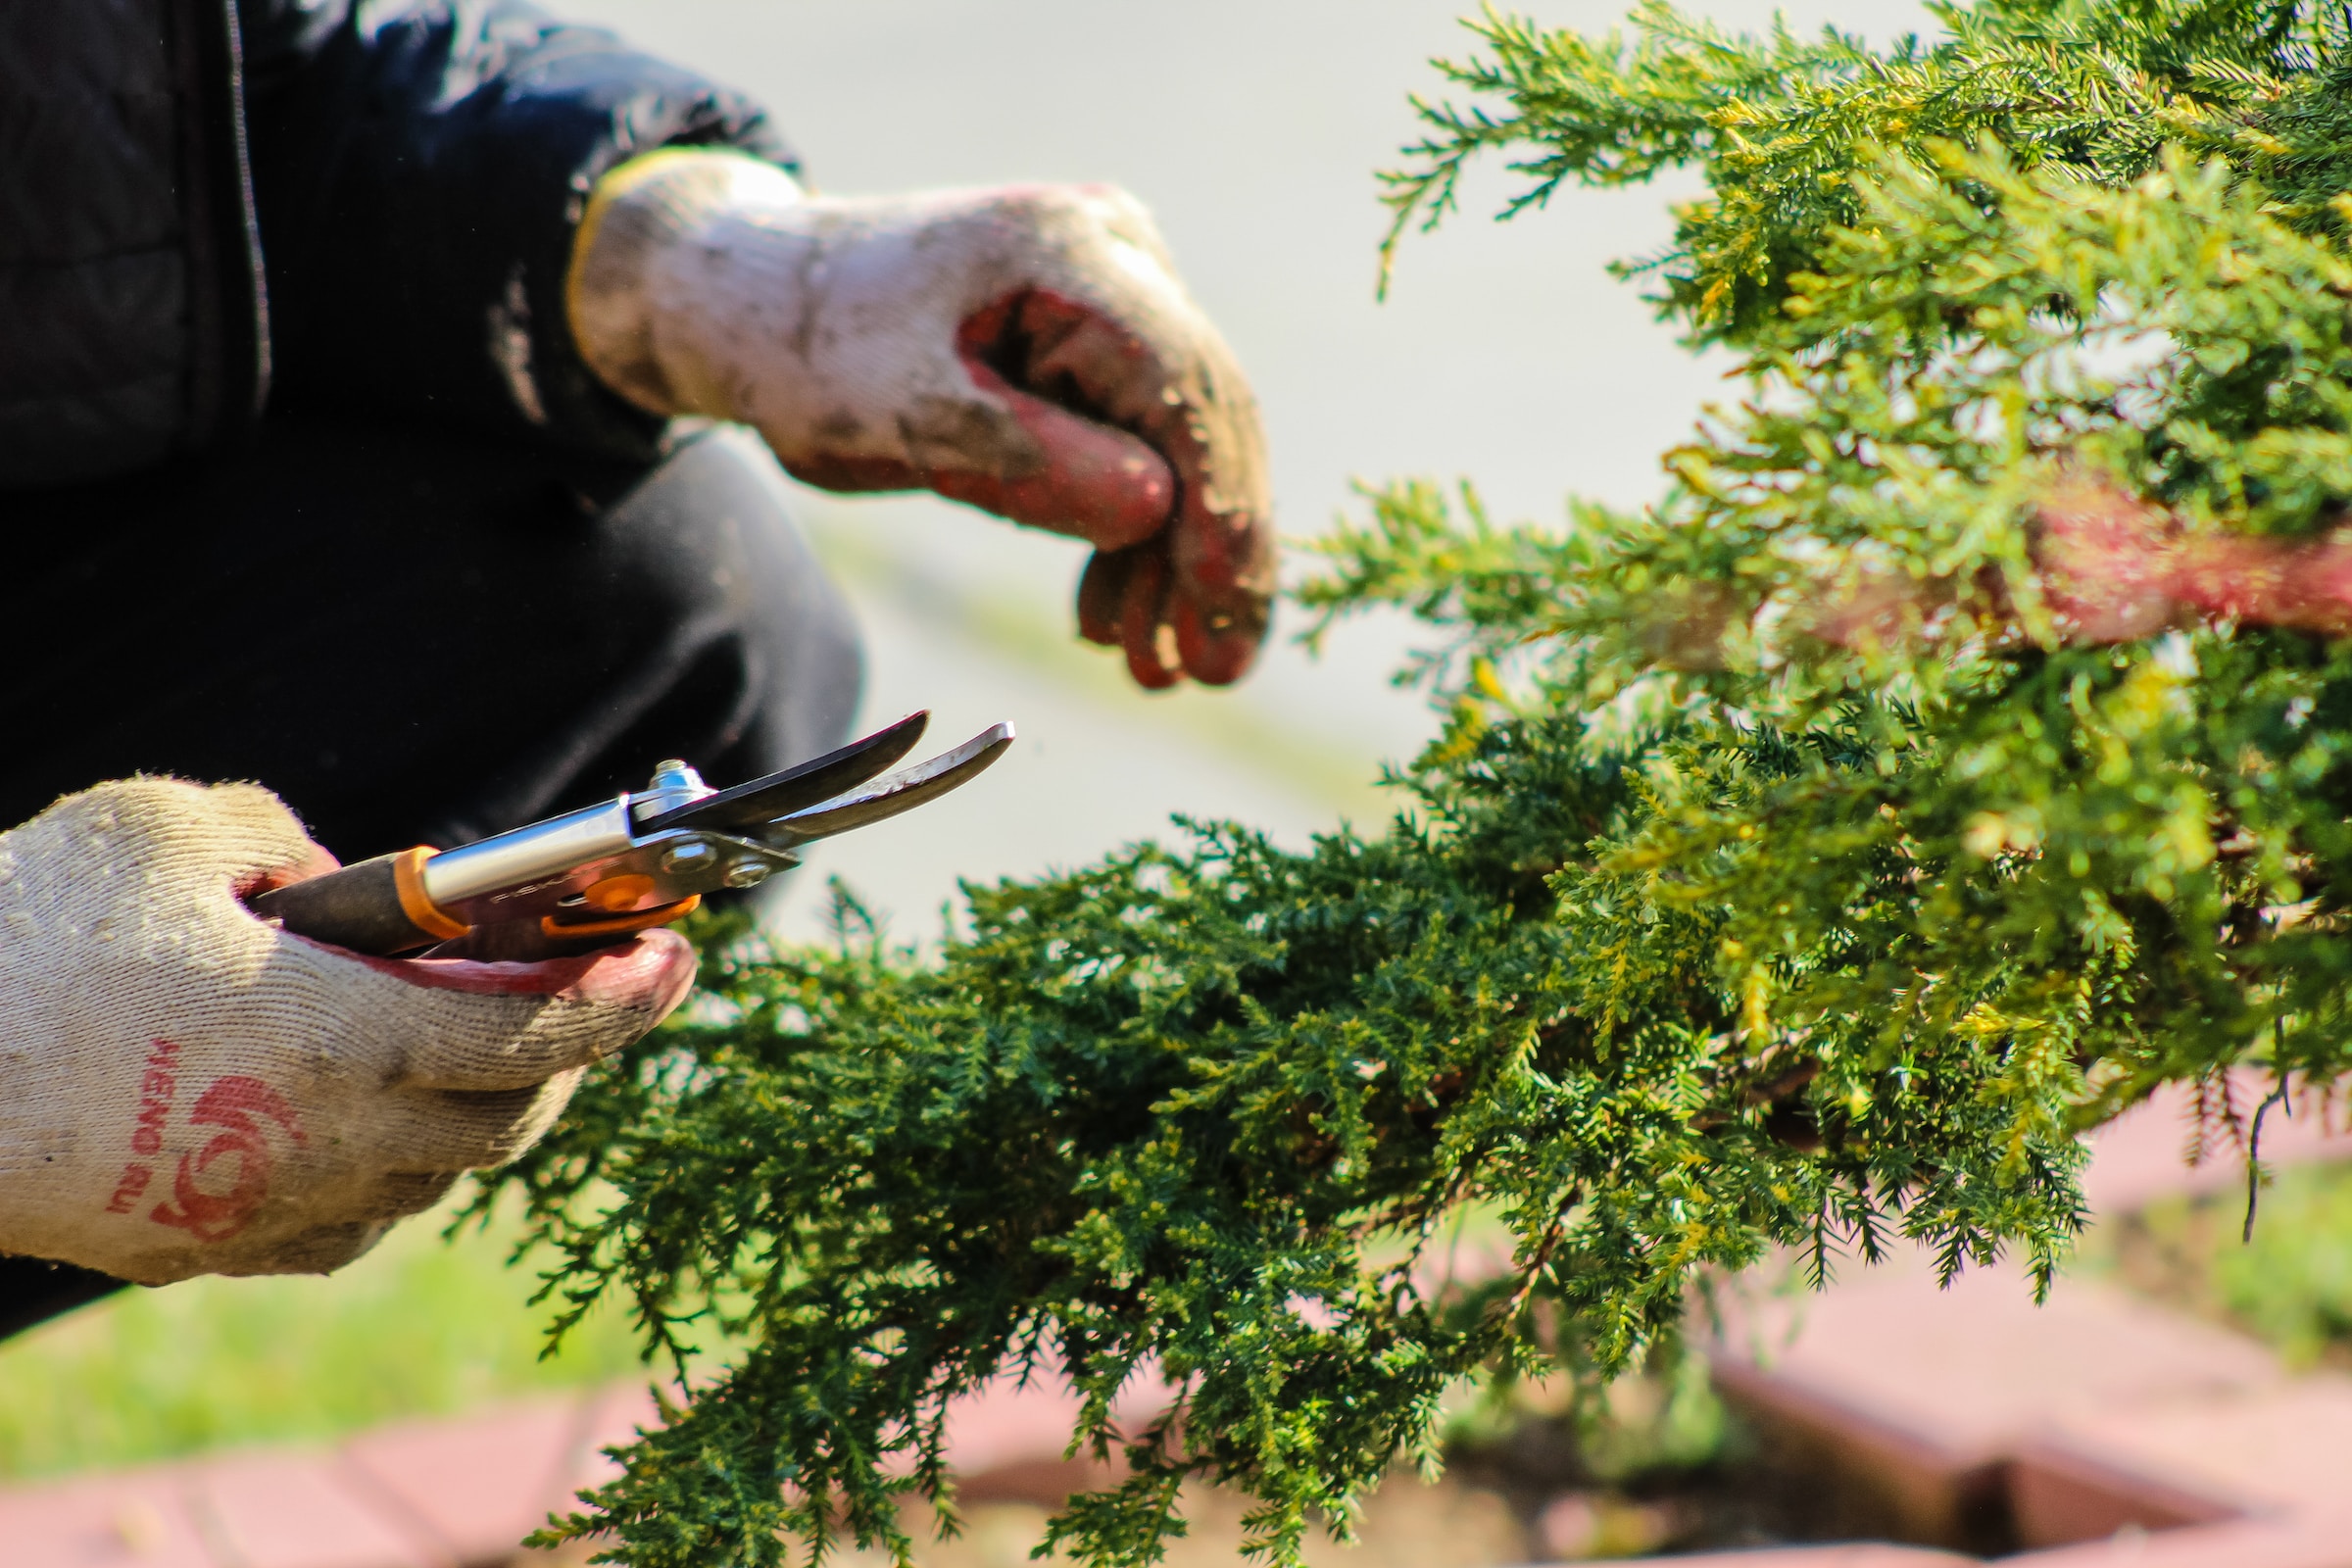 A person cutting a tree to enhance curb appeal through landscaping.